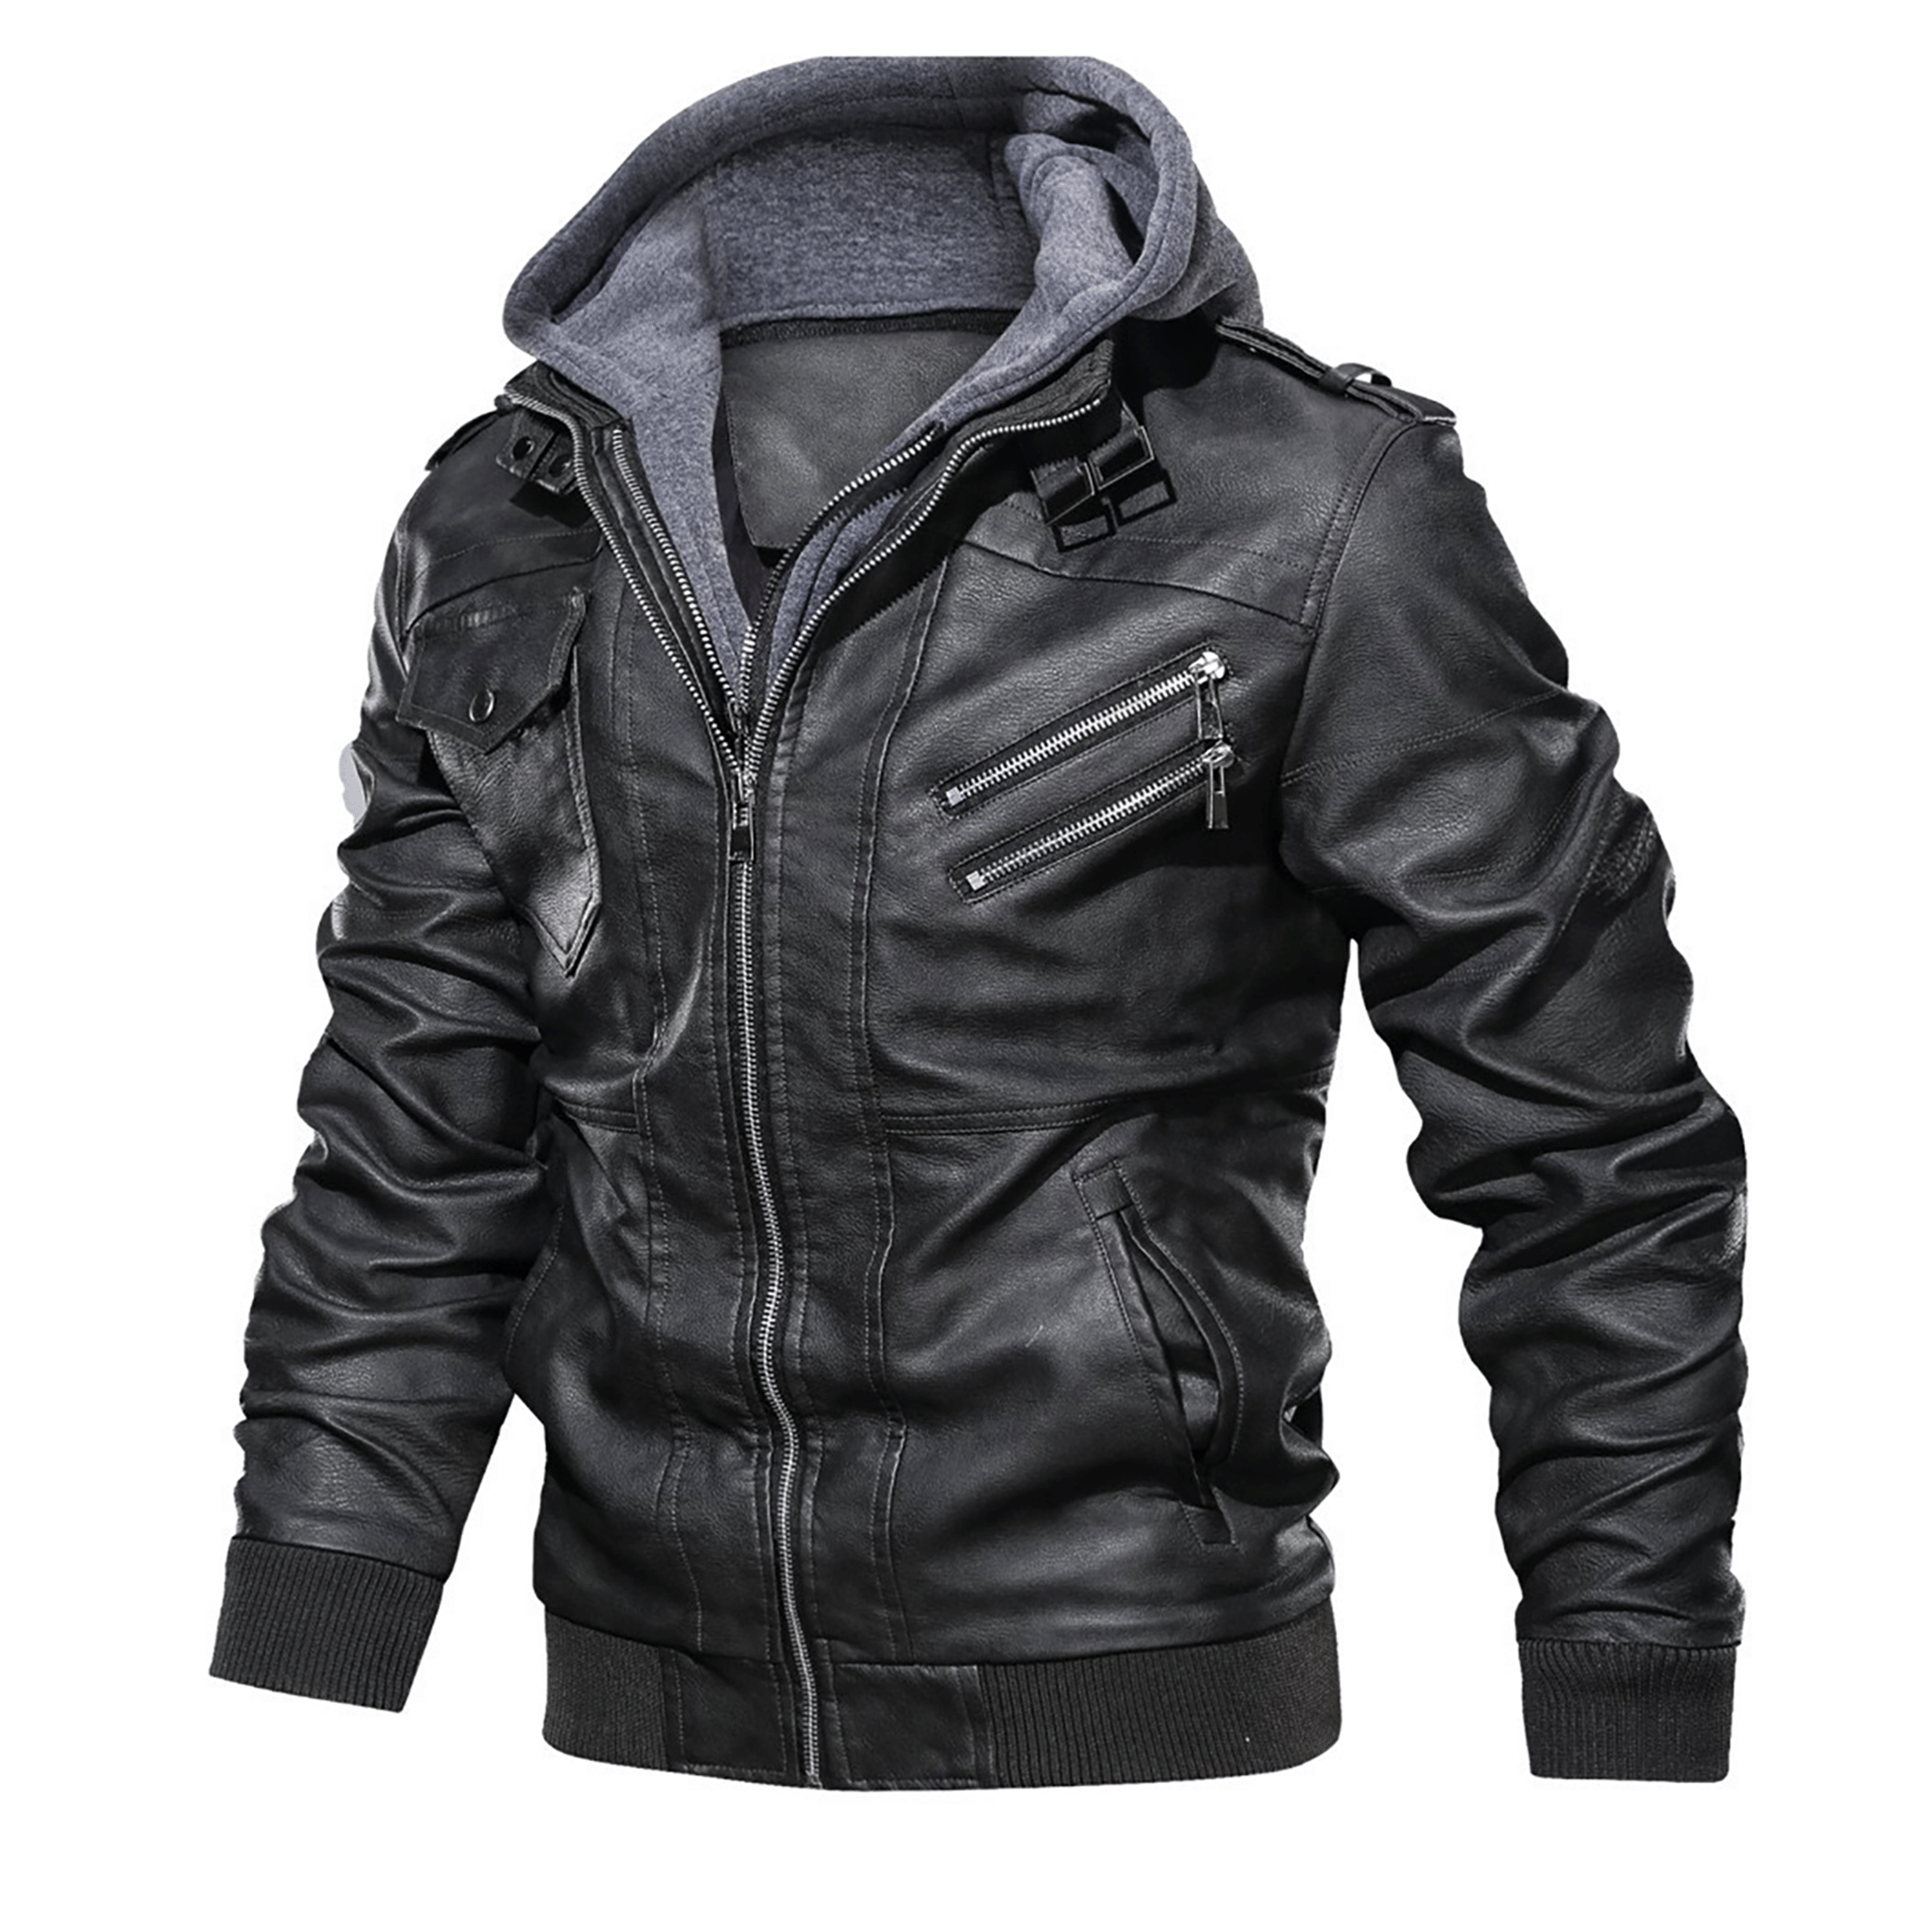 Top leather jackets and latest products 449